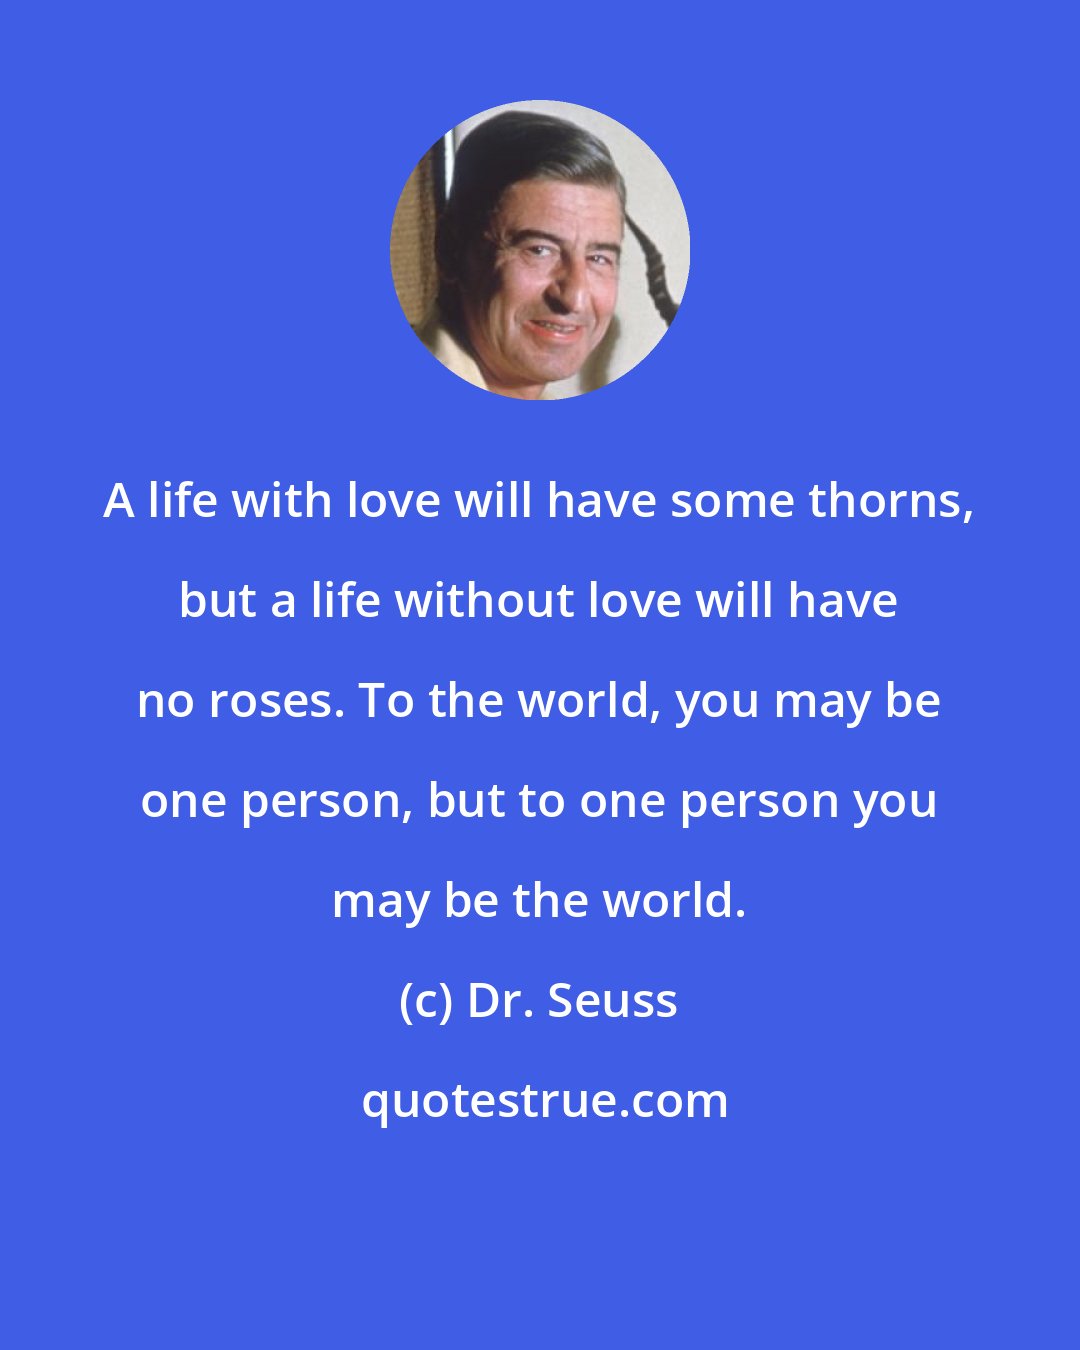 Dr. Seuss: A life with love will have some thorns, but a life without love will have no roses. To the world, you may be one person, but to one person you may be the world.